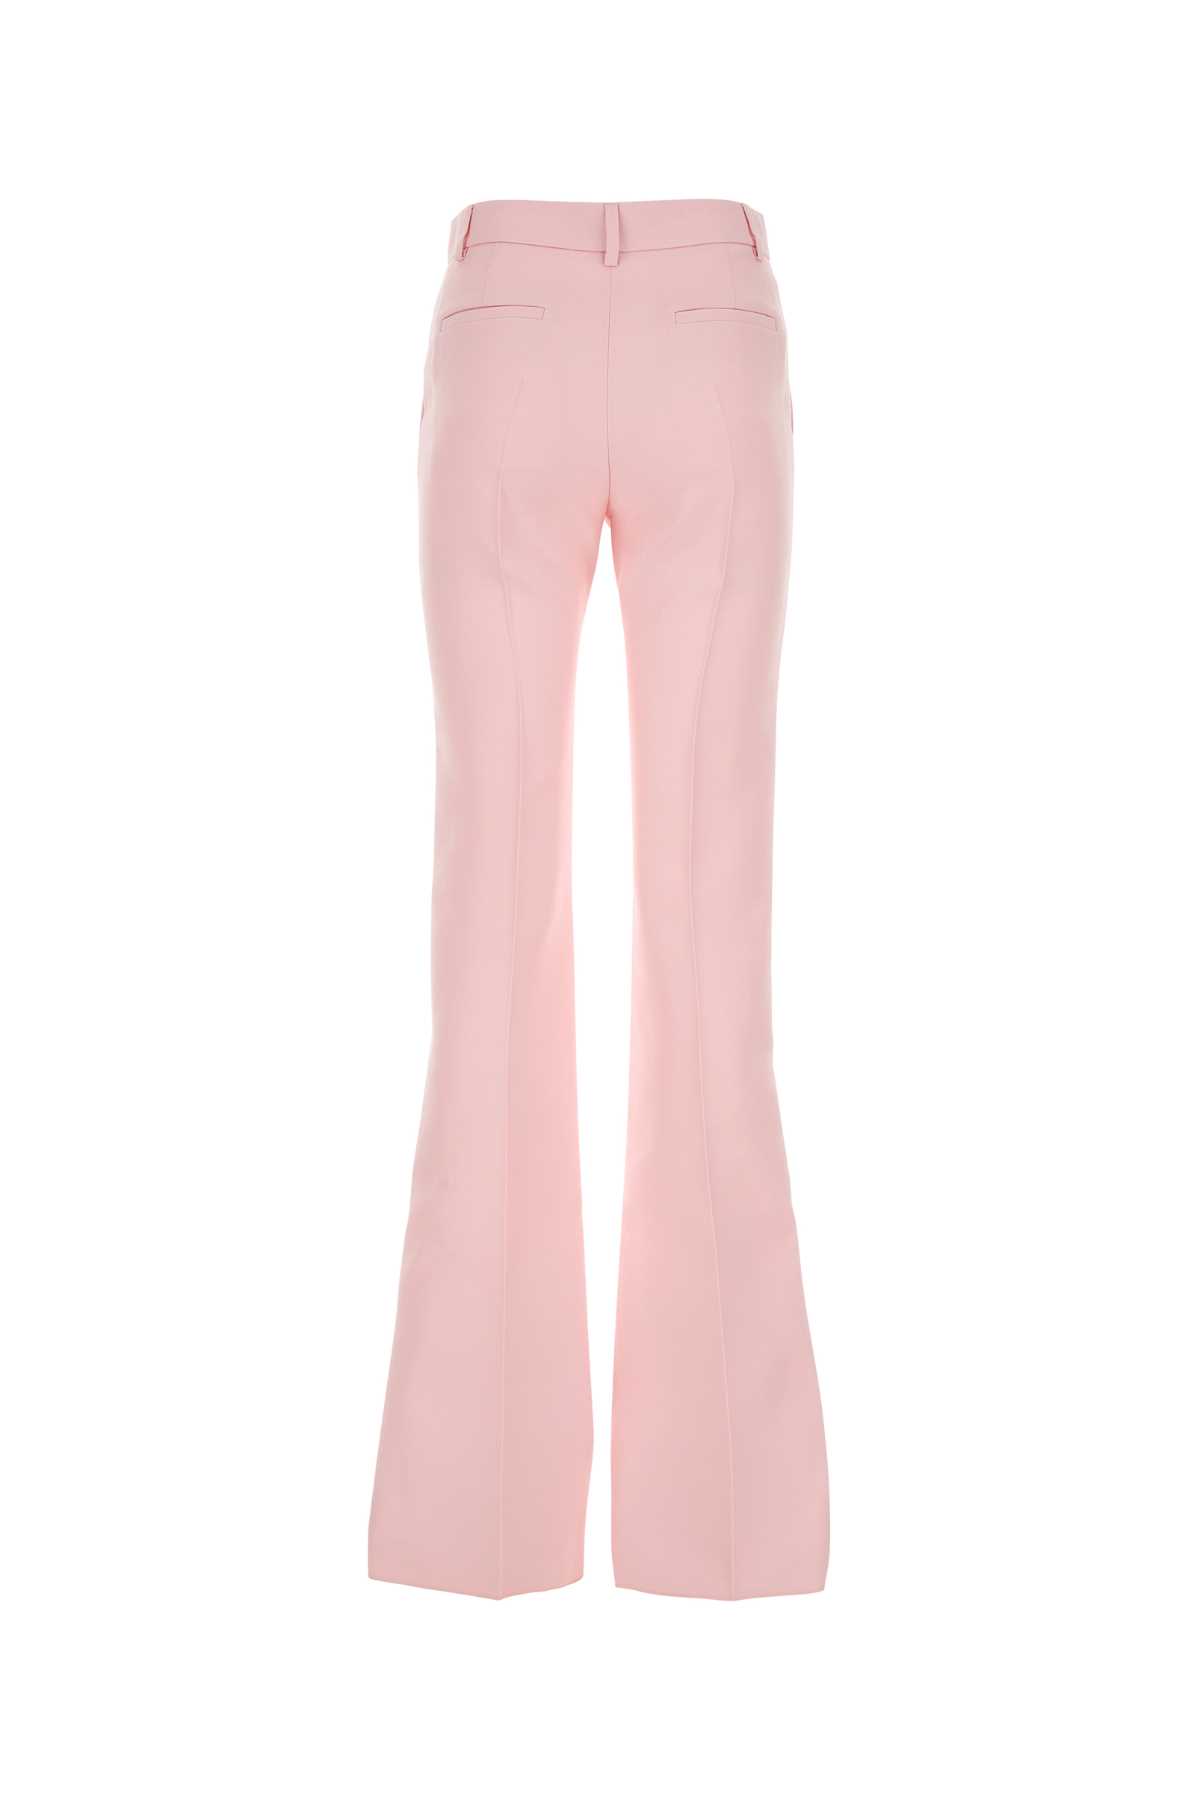 Shop Valentino Pastel Pink Crepe Pant In Taffy